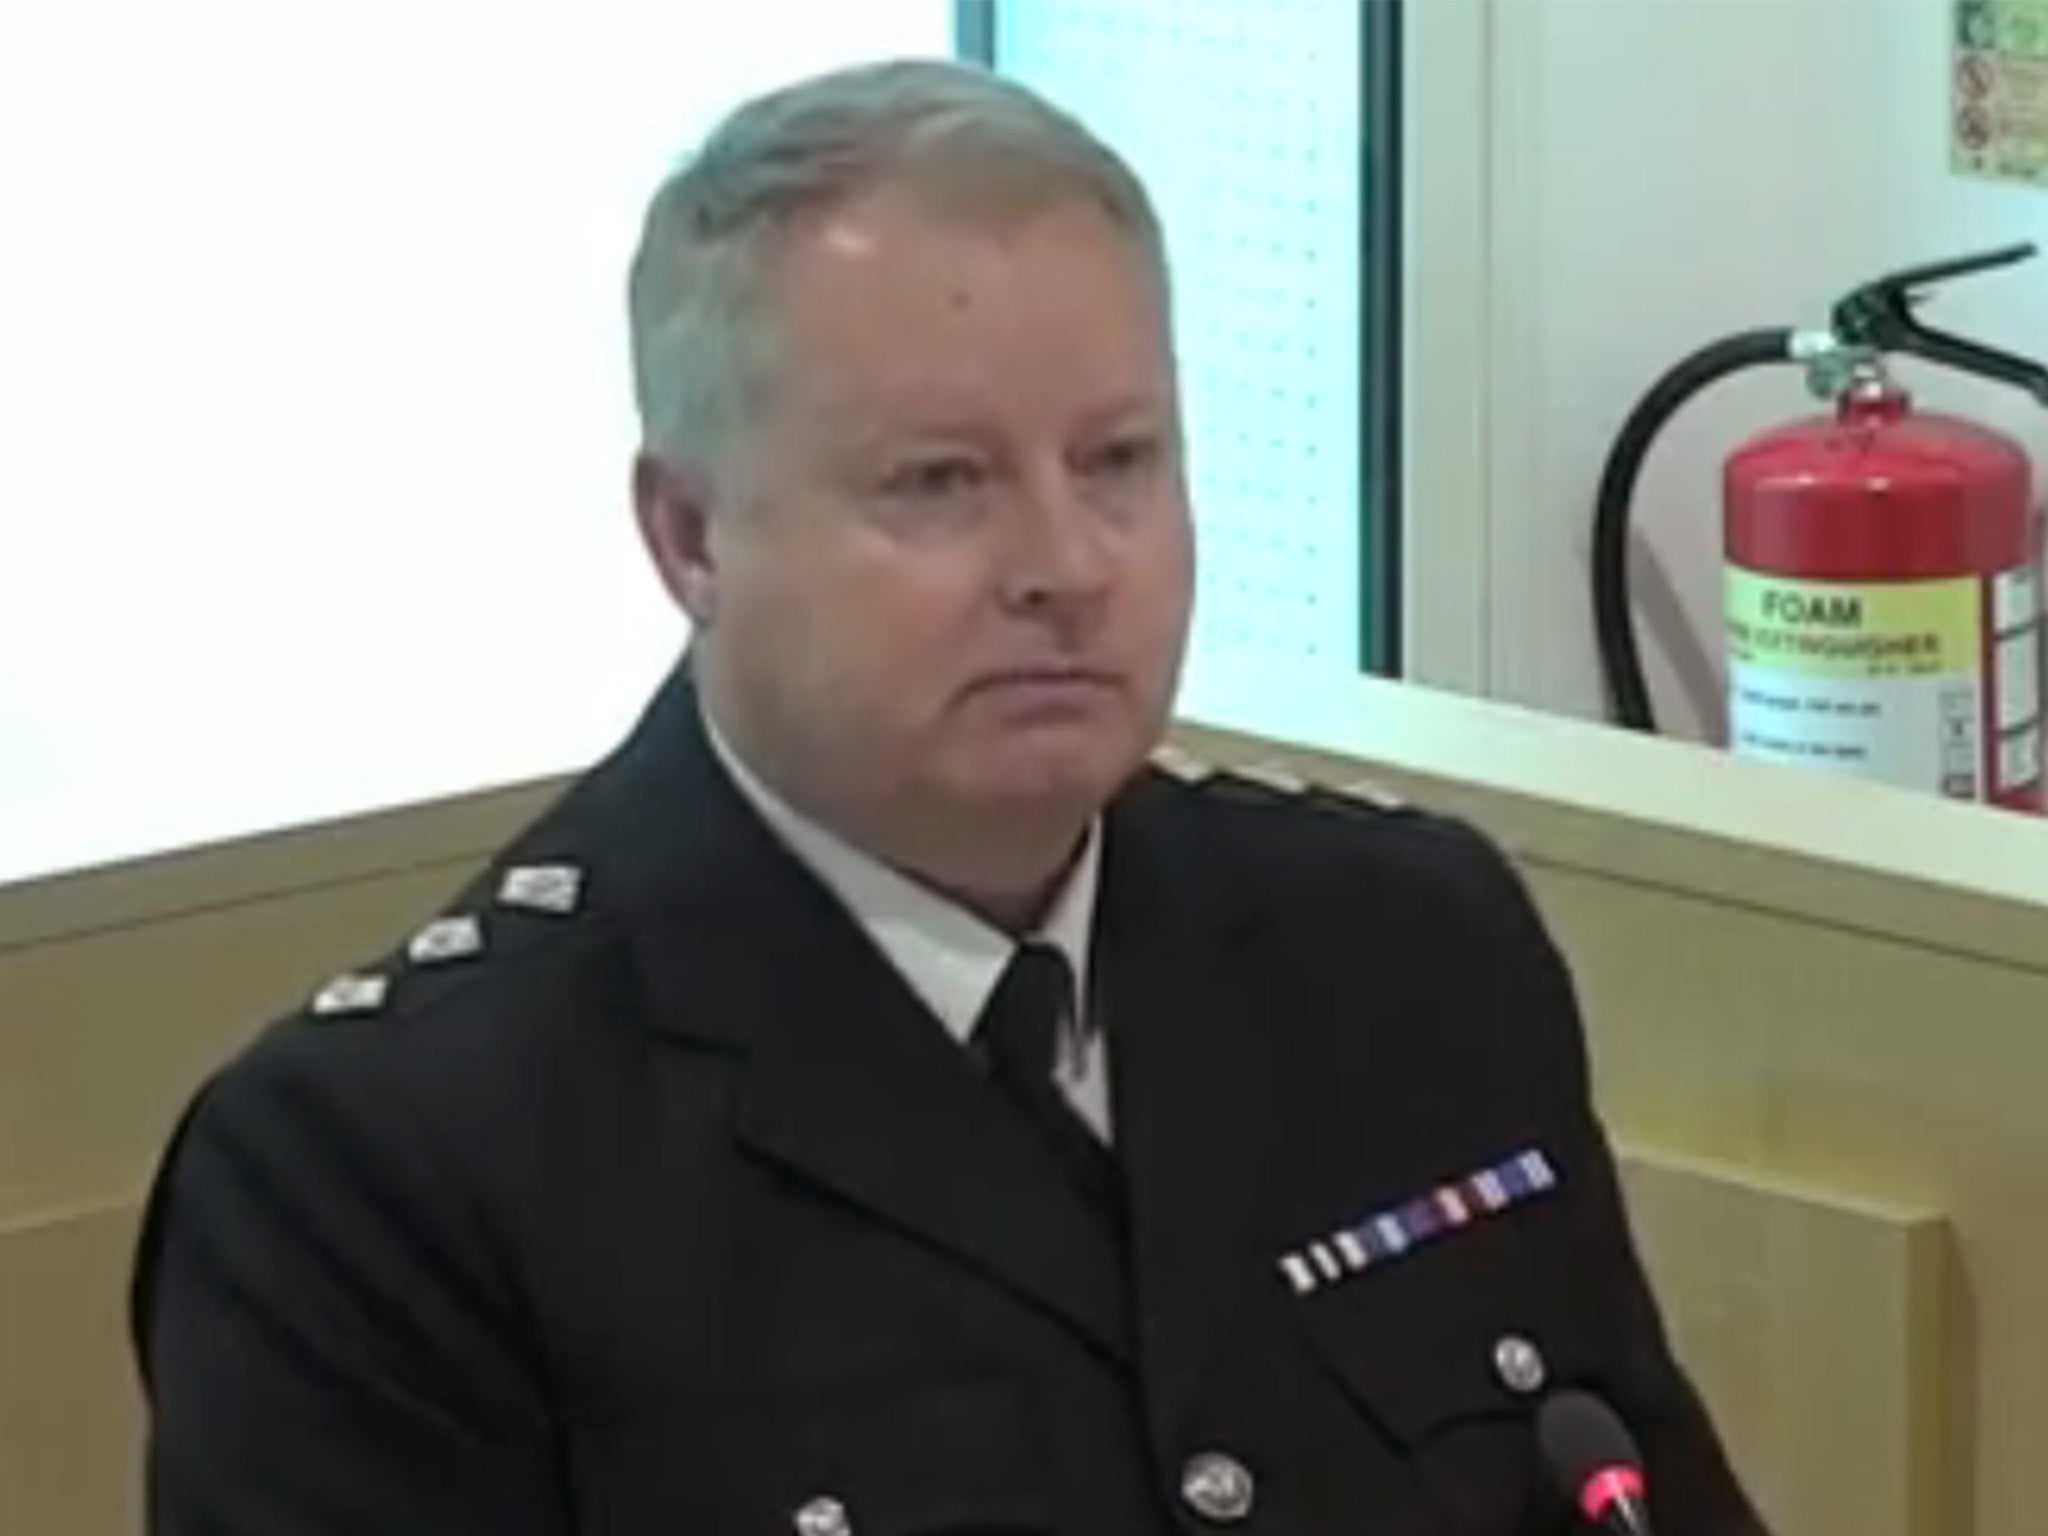 Dale Sexton, a former chief inspector at GMP, was in the command room at the time of the attack